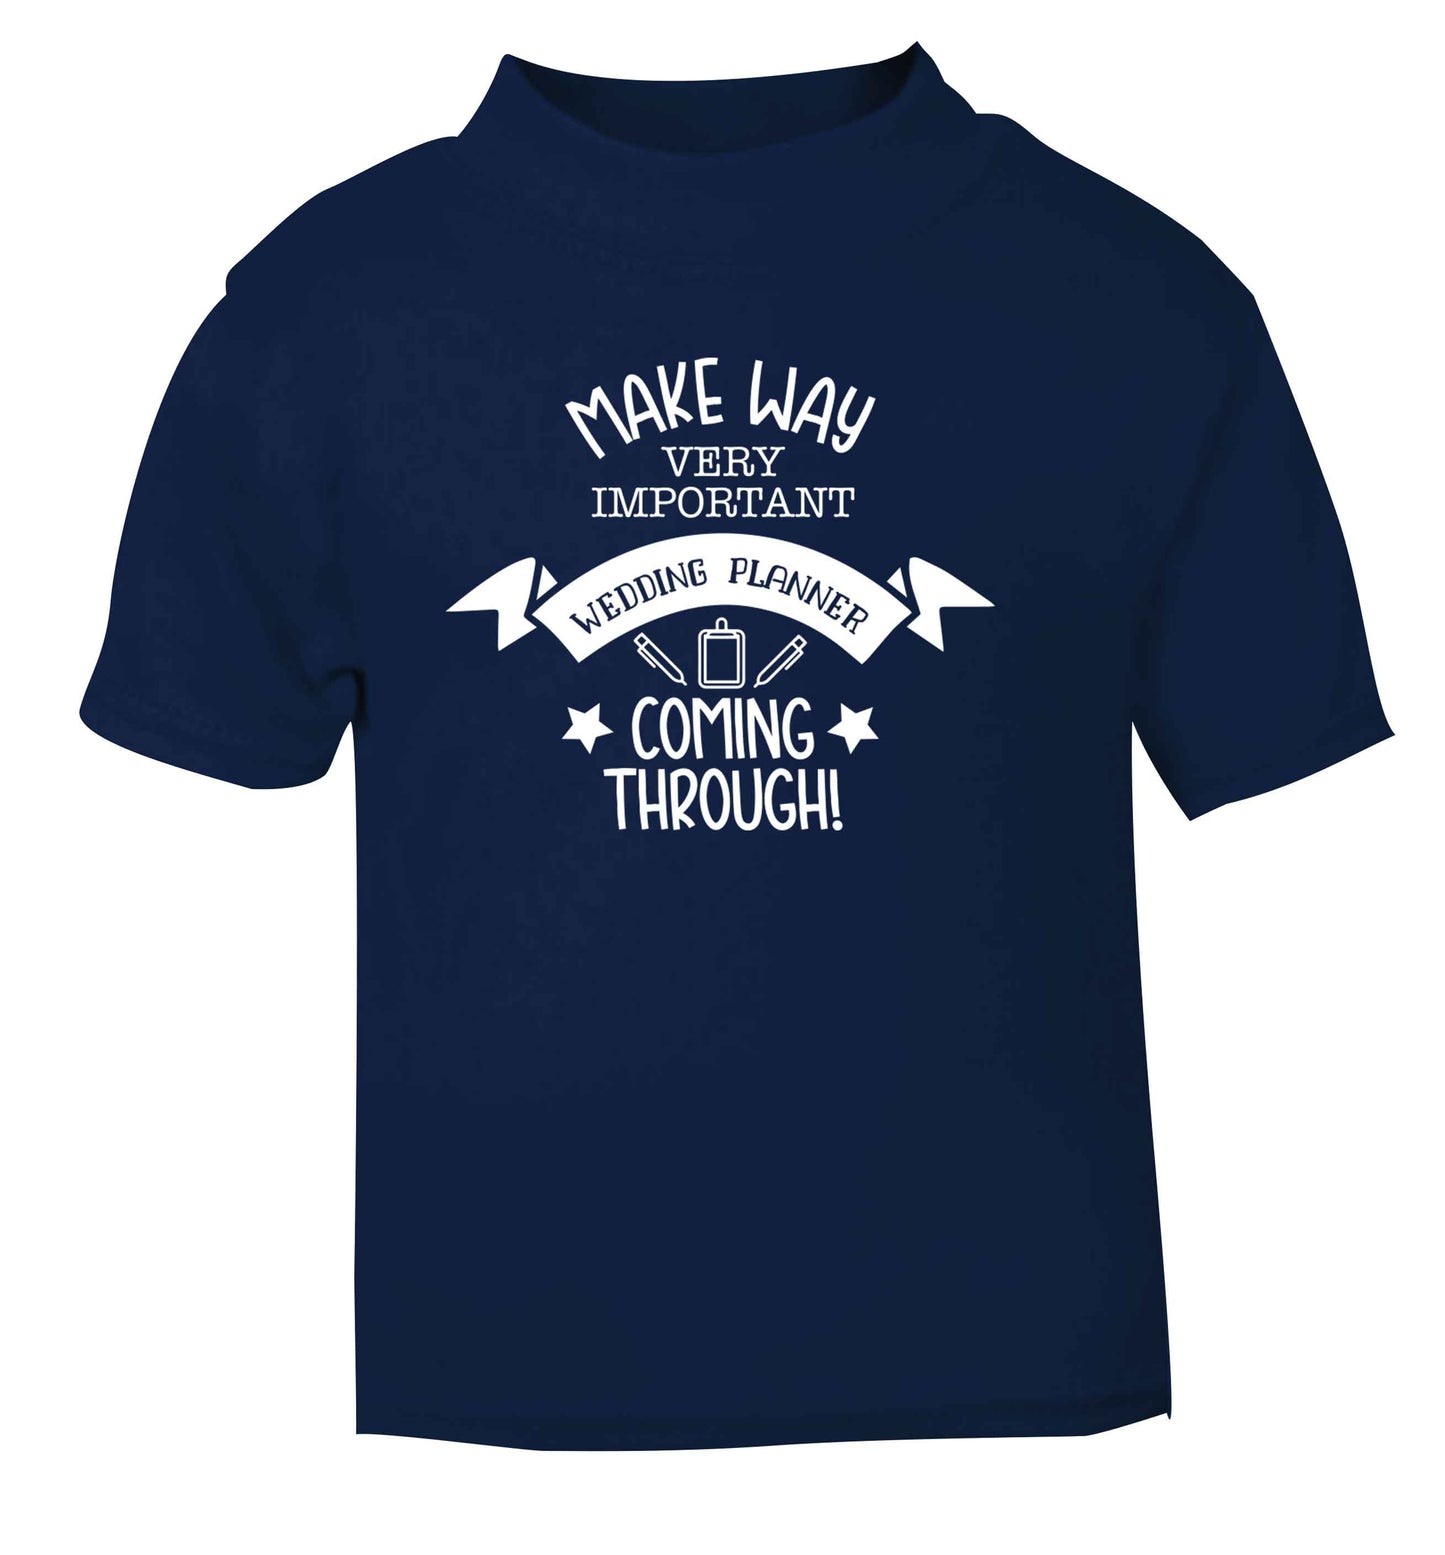 Make way very important wedding planner coming through navy Baby Toddler Tshirt 2 Years